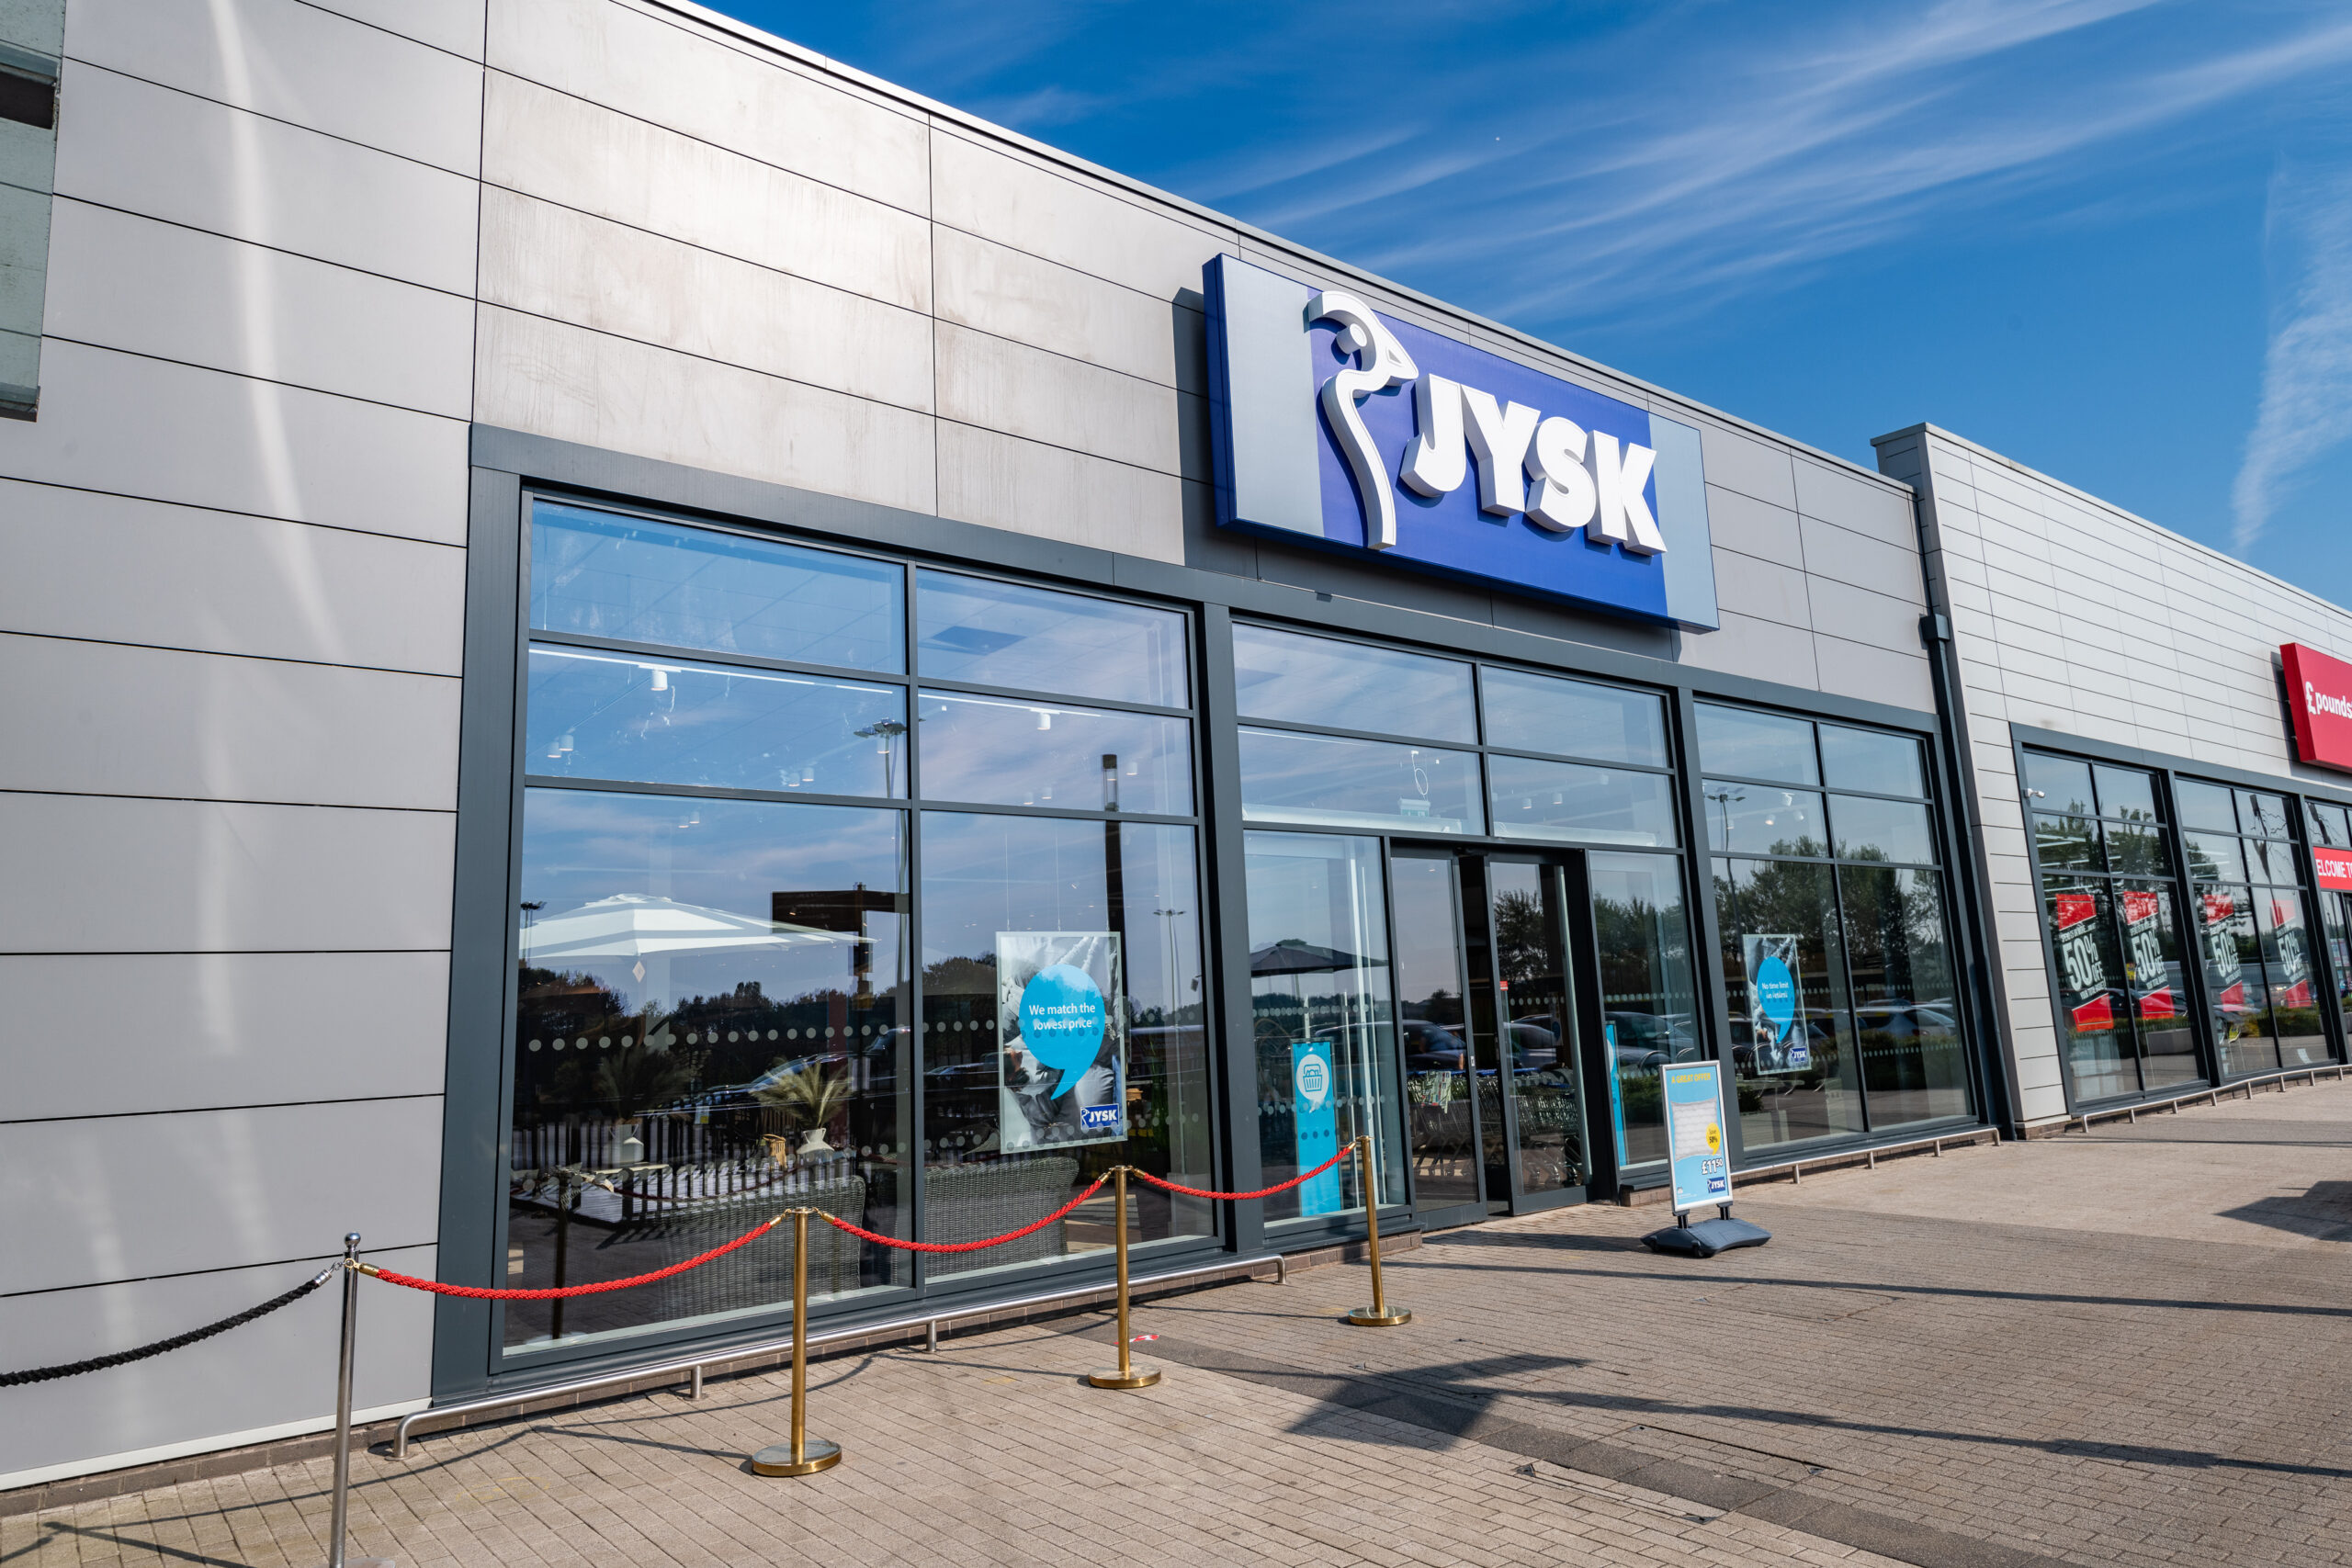 Inside JYSK, the Danish homeware brand that's opening a new XL store in Bolton